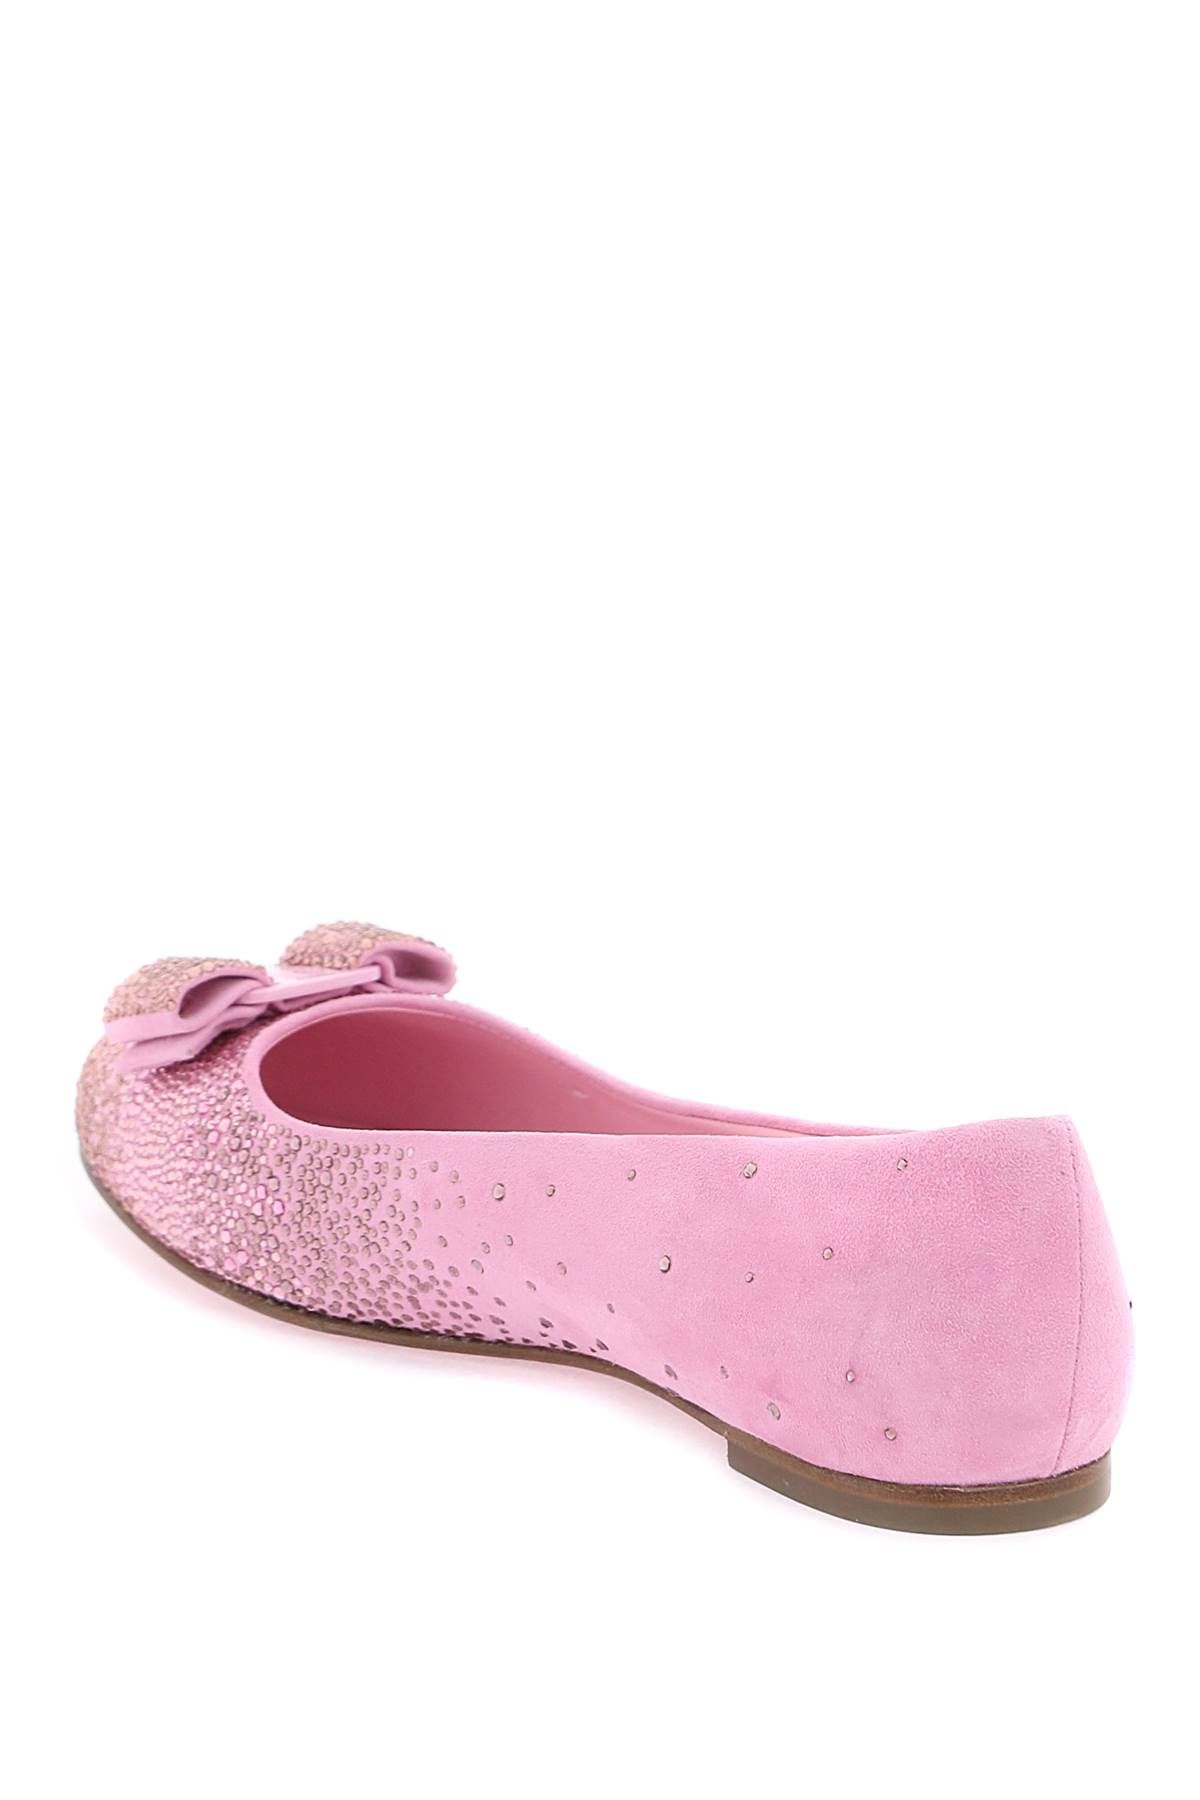 Shop Ferragamo Ballerina Flats With Vara Bow And Crystals In Pink